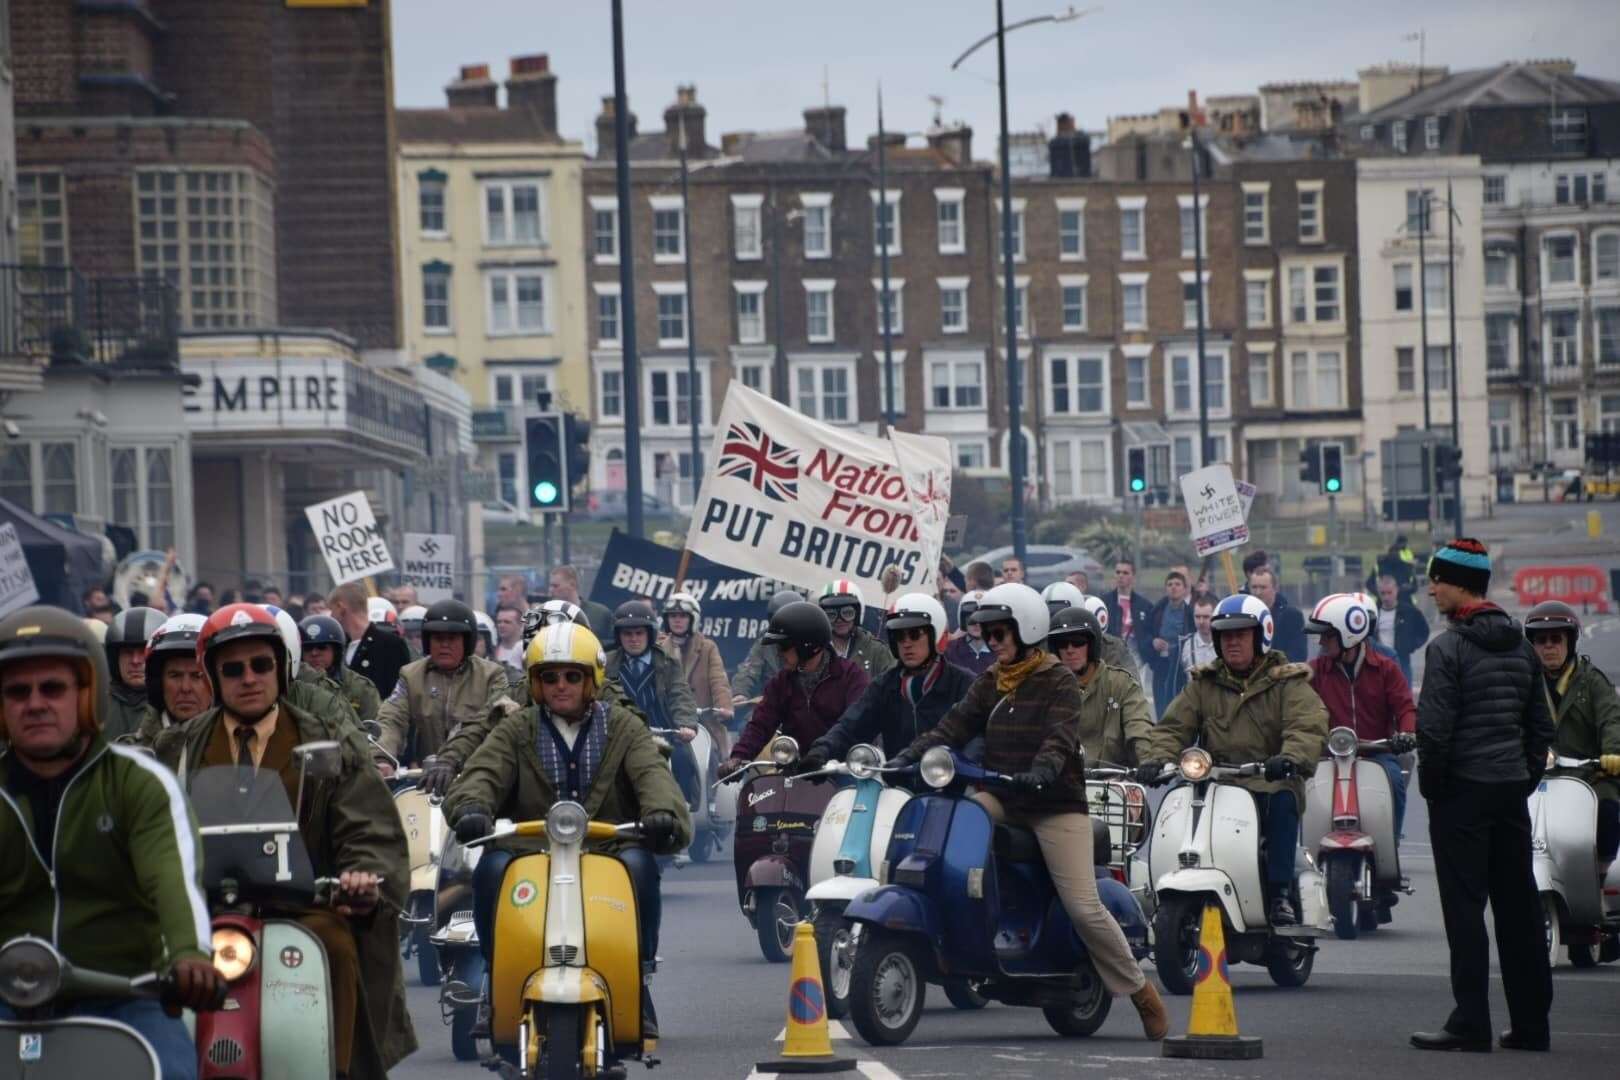 A procession of scooter-riding mods were seen riding along Margate seafront in April during filming of Empire of Light. Picture: Roberto Fabiani